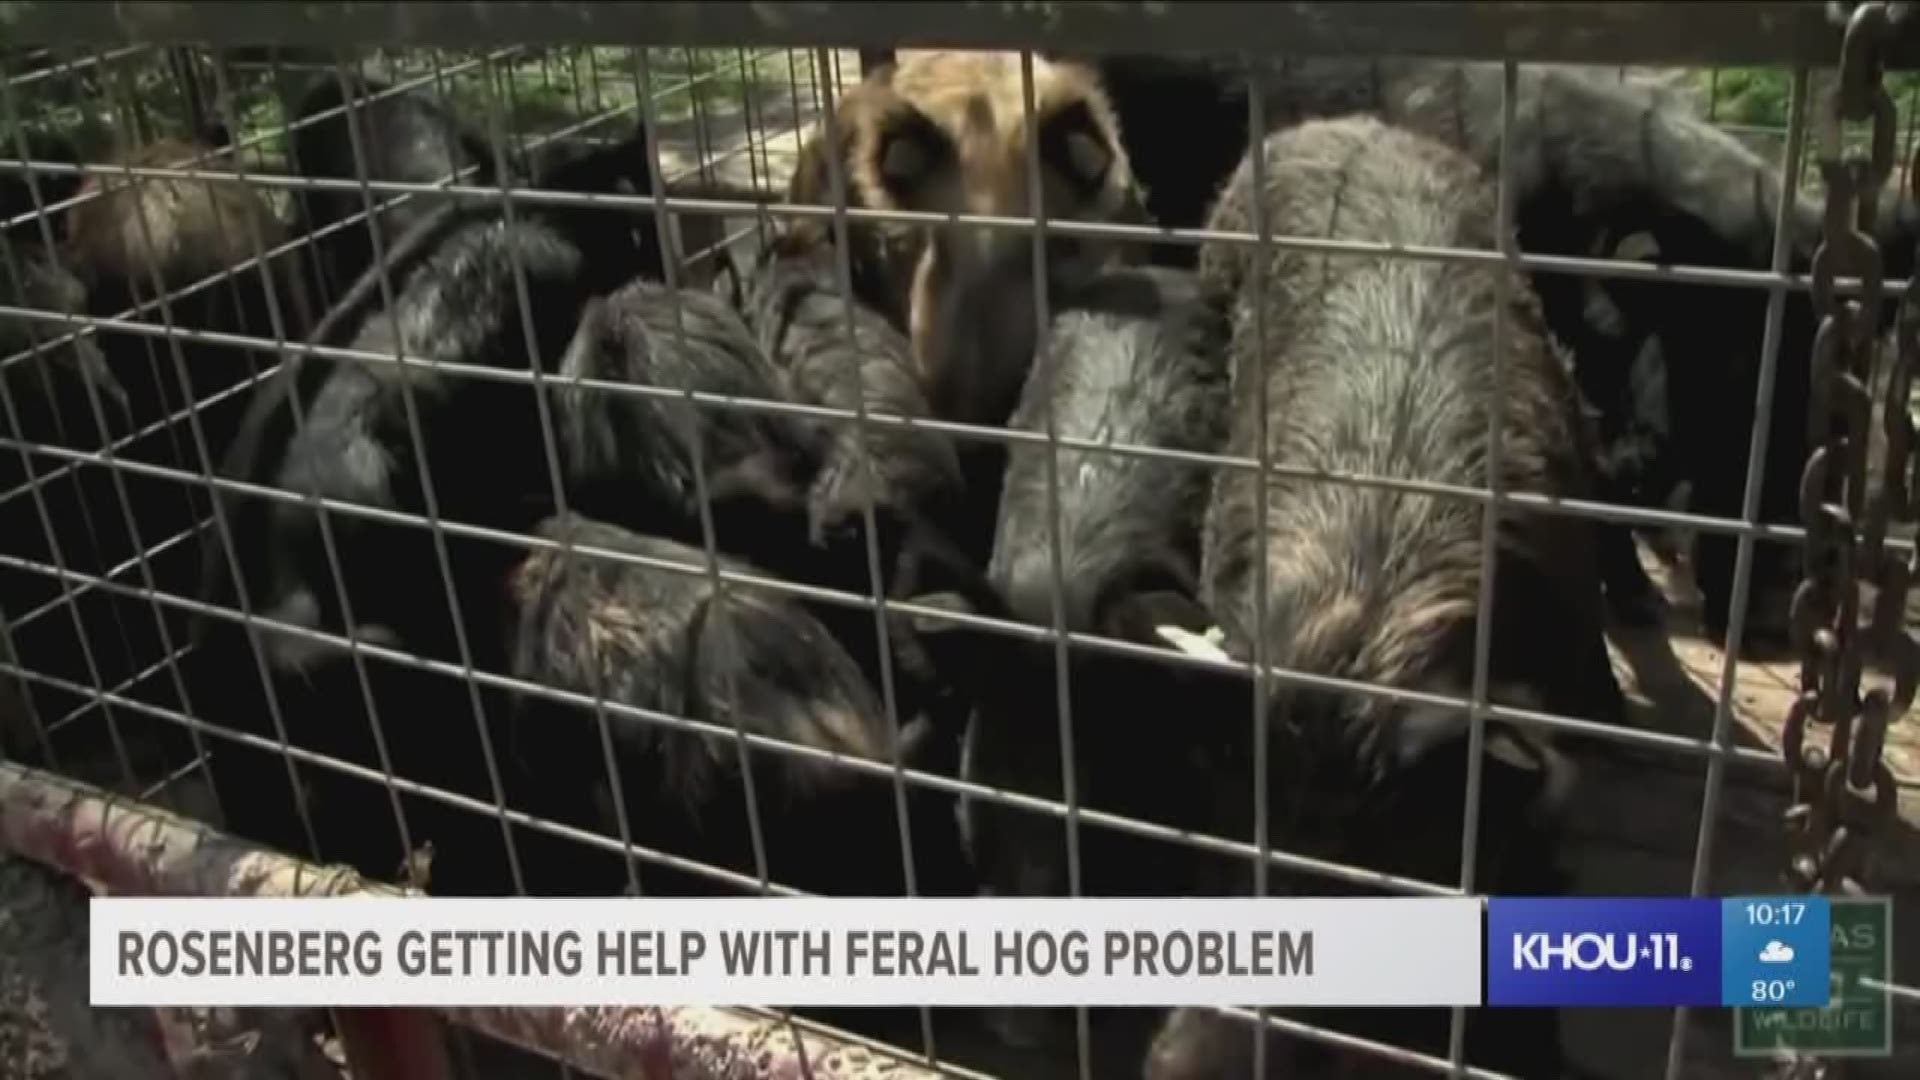 People in Rosenberg are fed up with the feral hogs in their neighborhood. They're digging up their yards and destroying expensive landscaping.